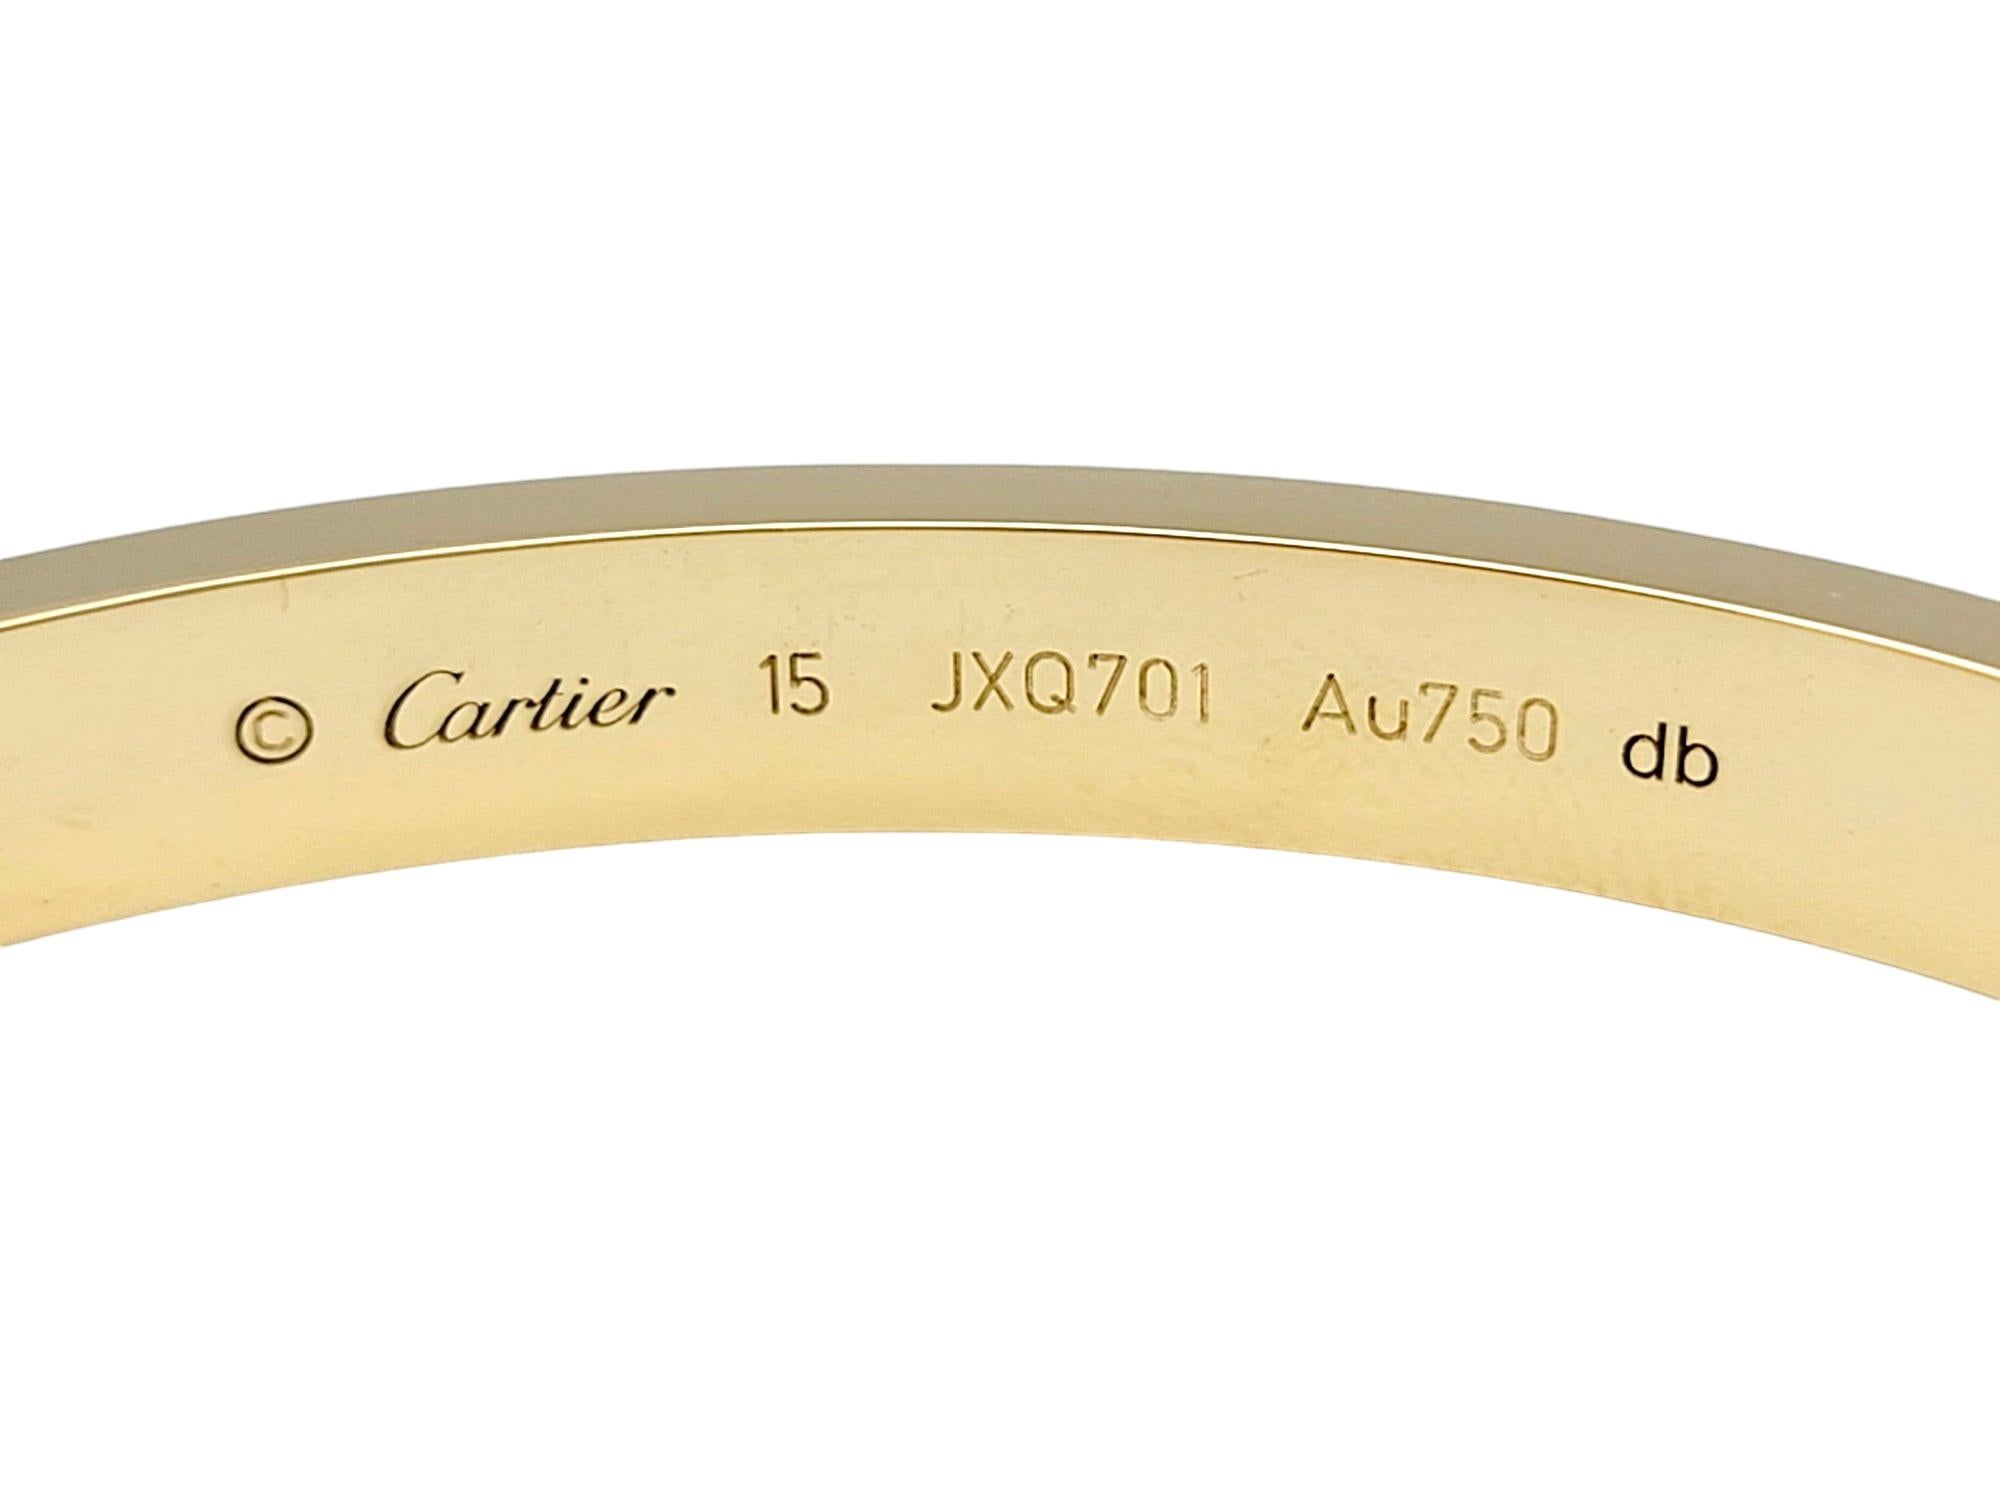 Contemporary Cartier Love Bangle Bracelet with Screwdriver Set in 18 Karat Yellow Gold